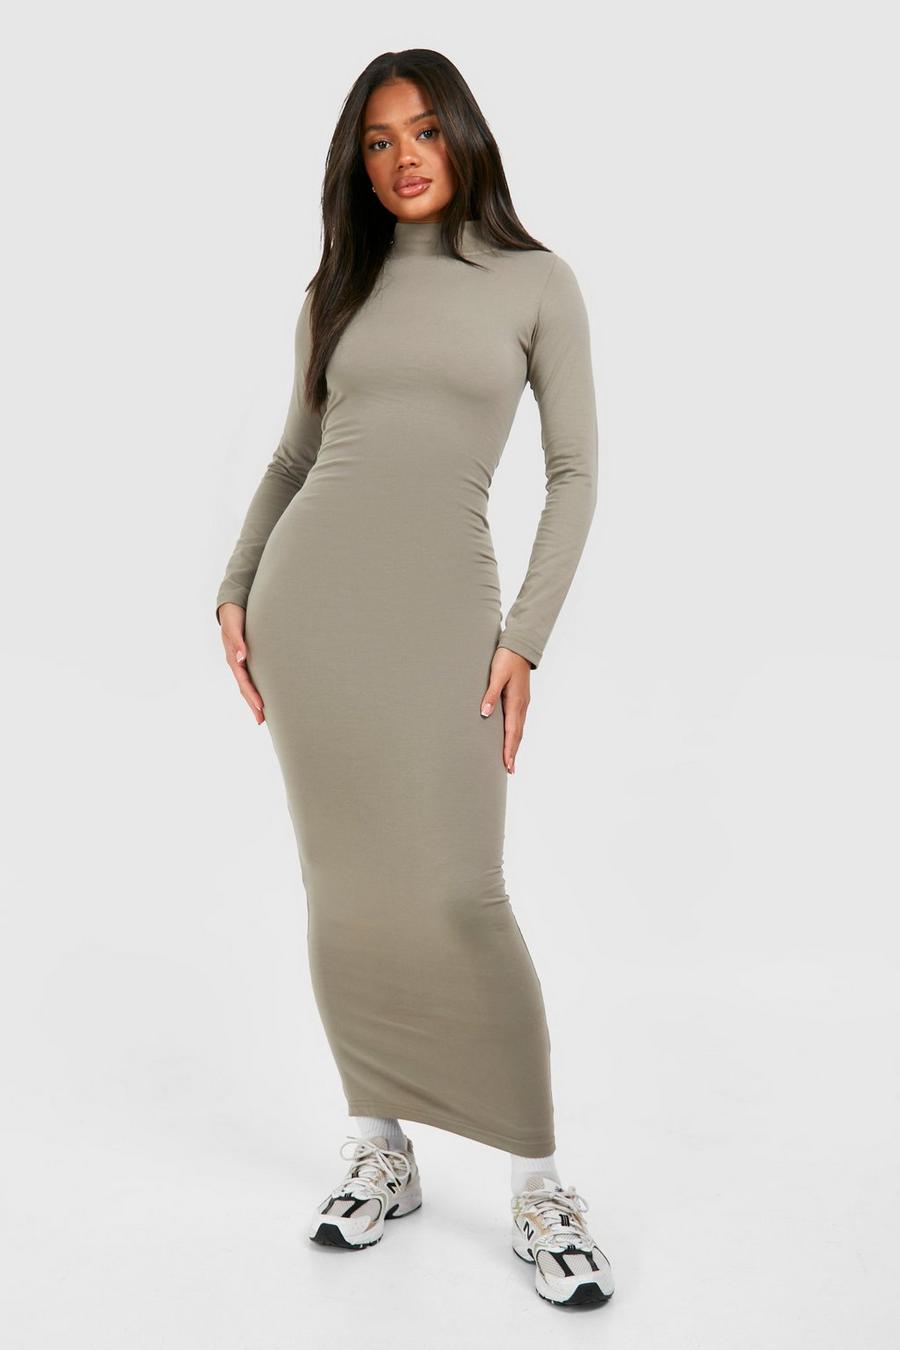 CHGBMOK Clearance Long Sleeve Dress for Women Fashion Solid Color